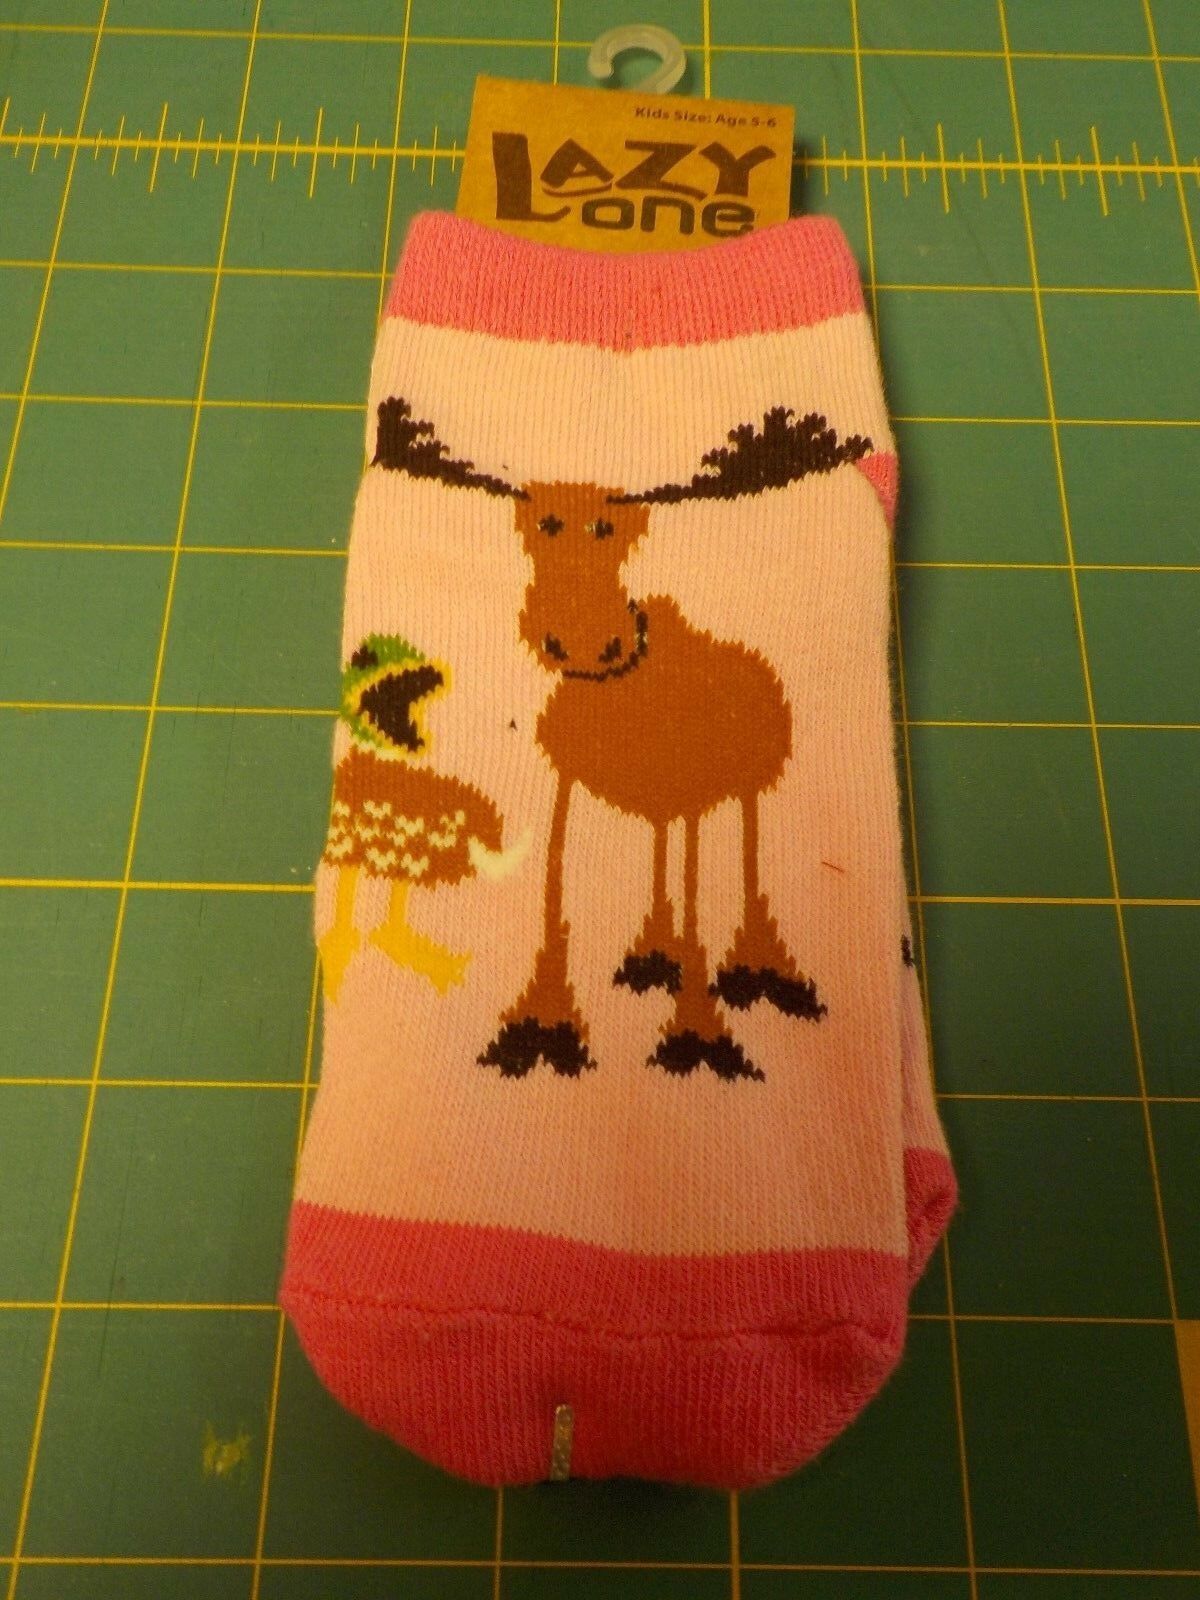 Lazy One Kids Size Age 5-6 Years Pink Moose Duck Nonskid Slipper Socks New #7240